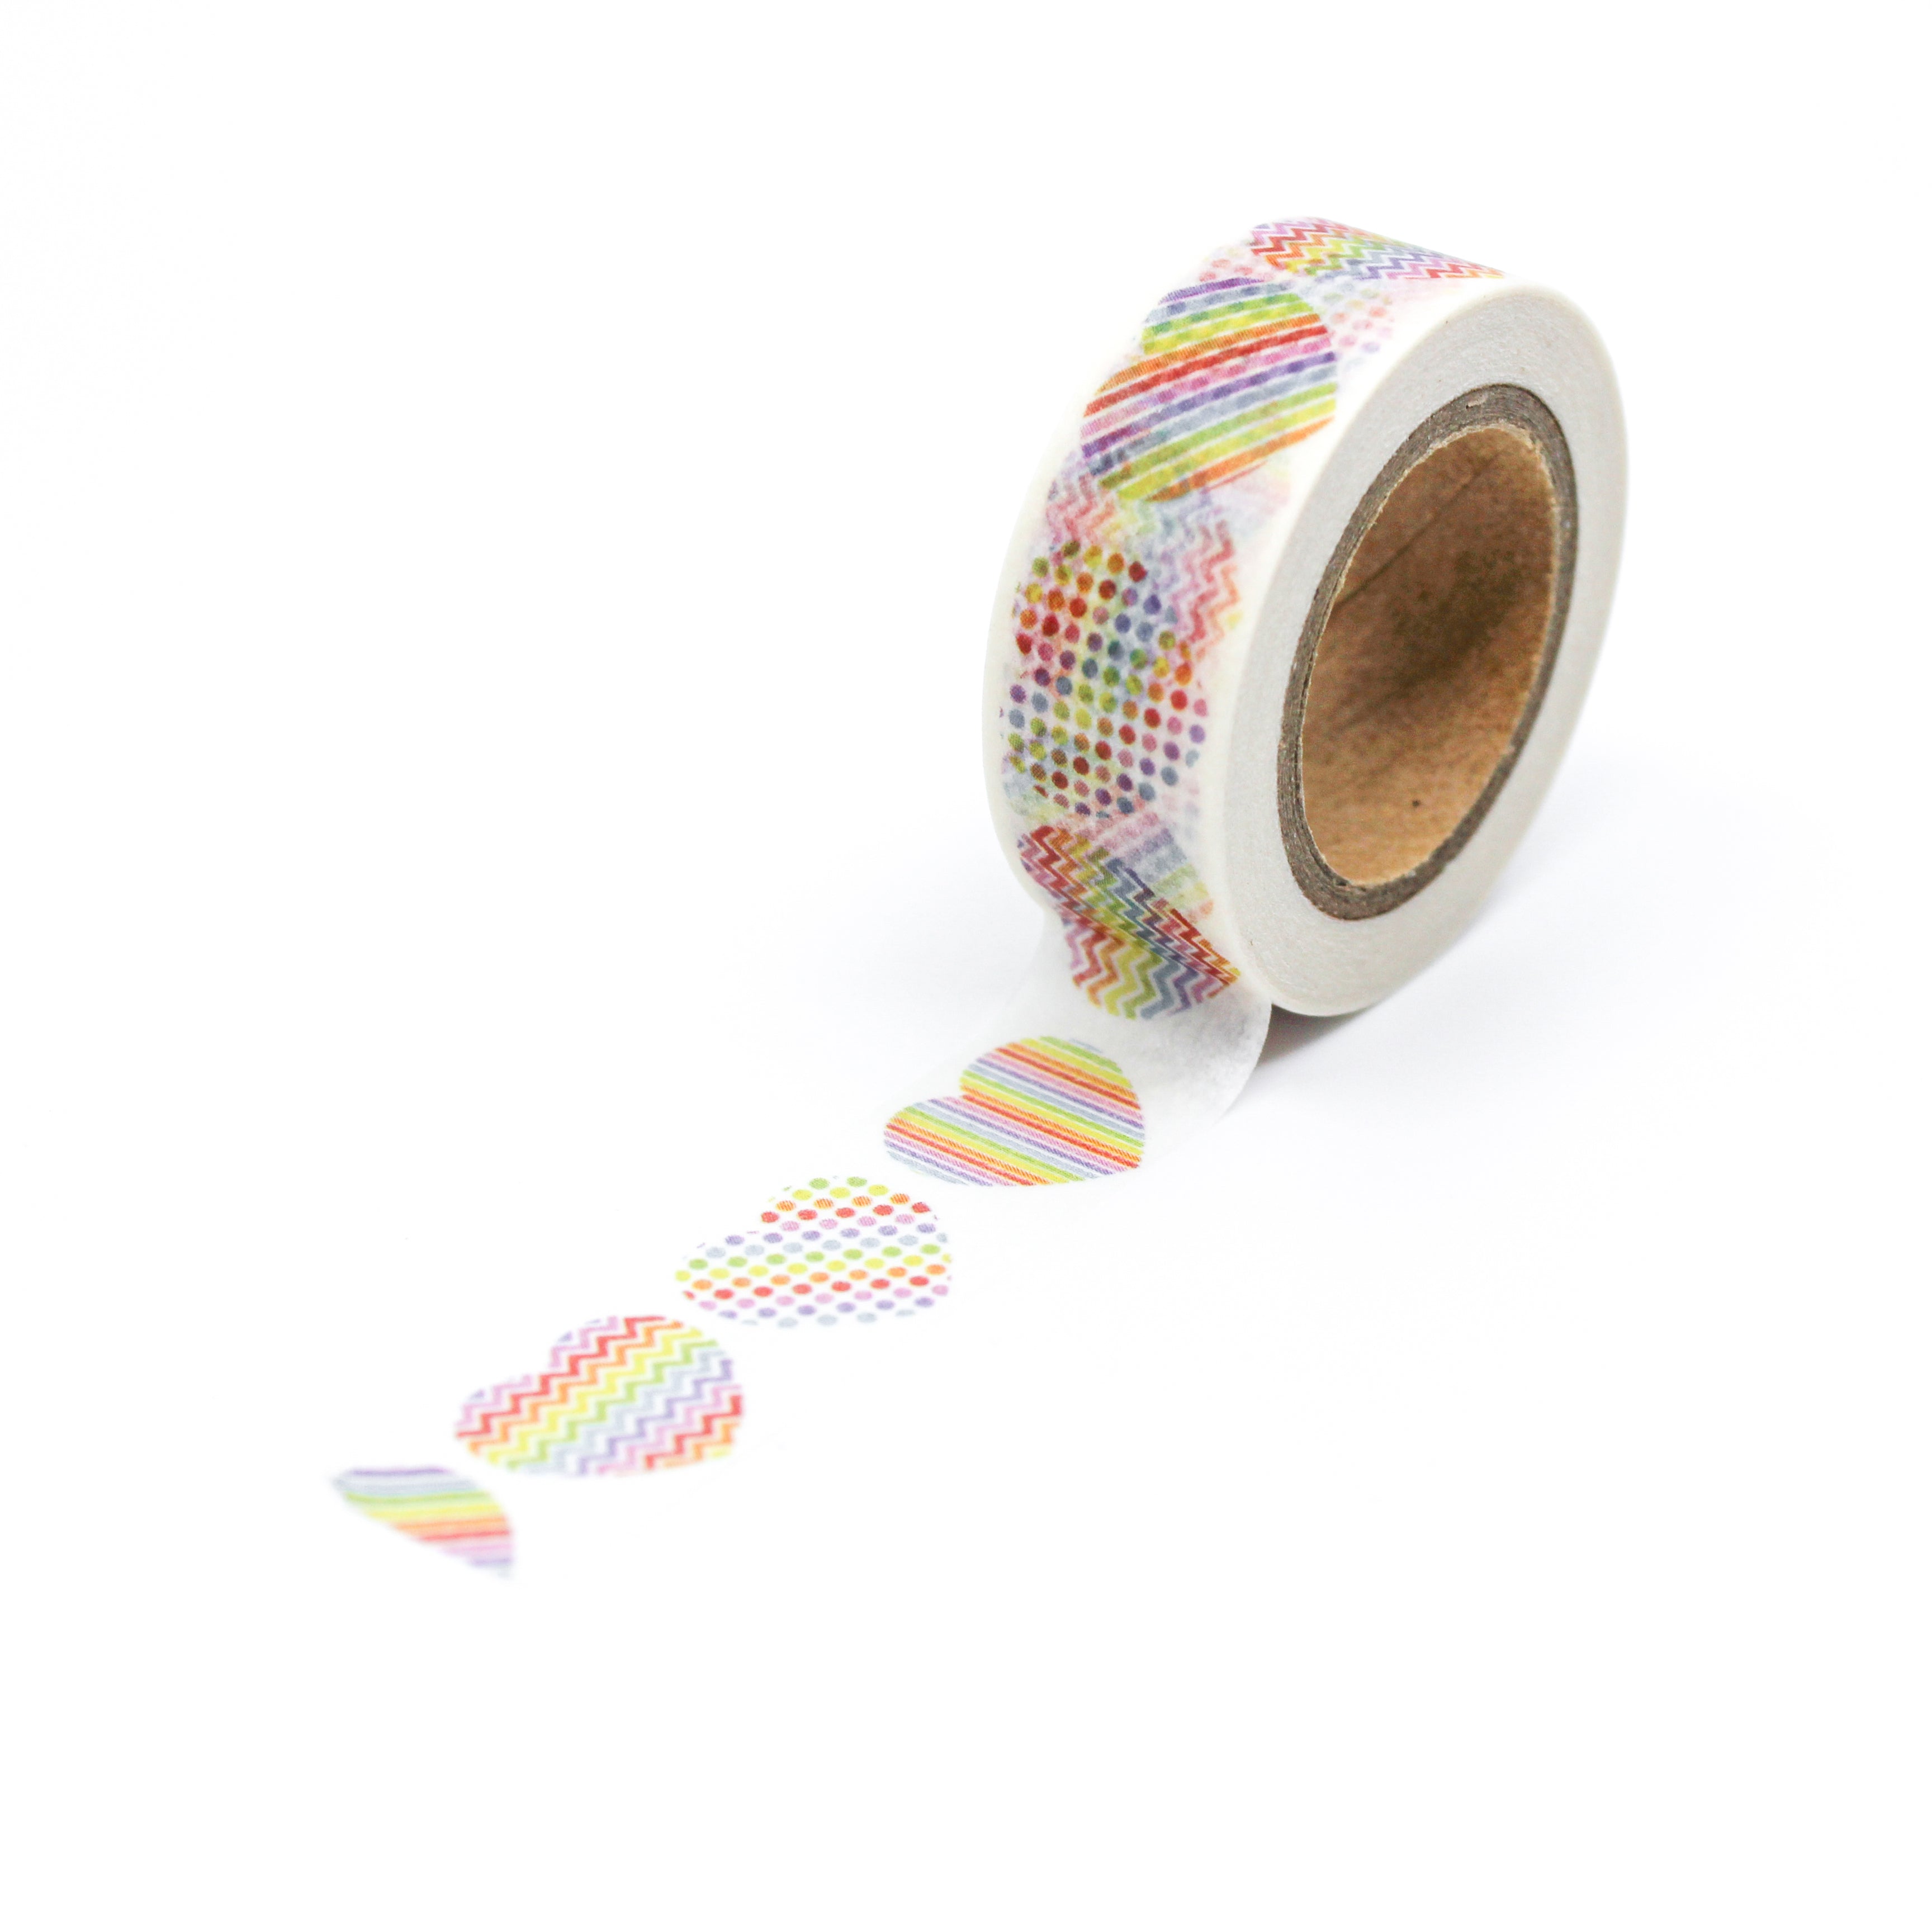 This is a full pattern review view of rainbow color multi hearts washi tape from BBB Supplies Craft Shop